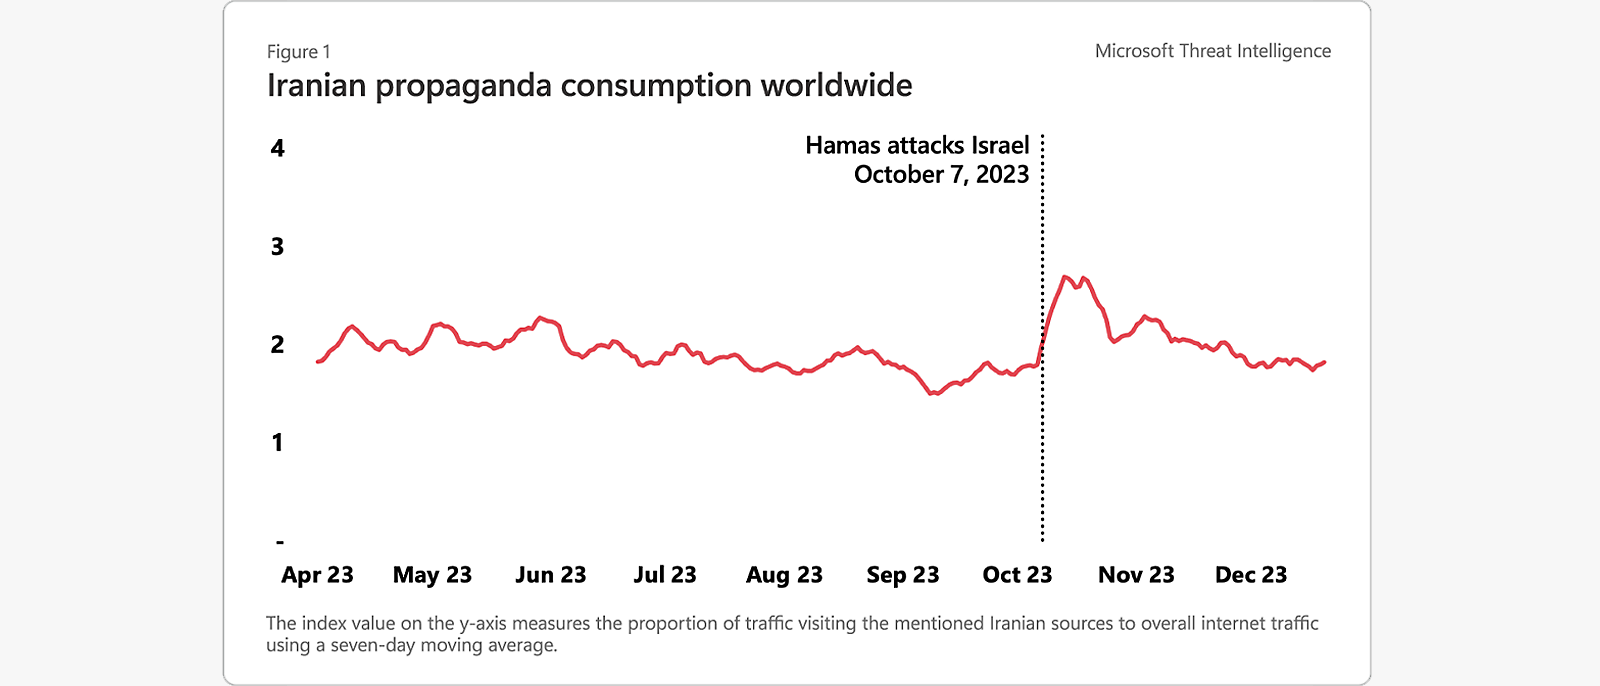 Iranian propaganda consumption worldwide illustrated with a timeline and proportion of traffic graph